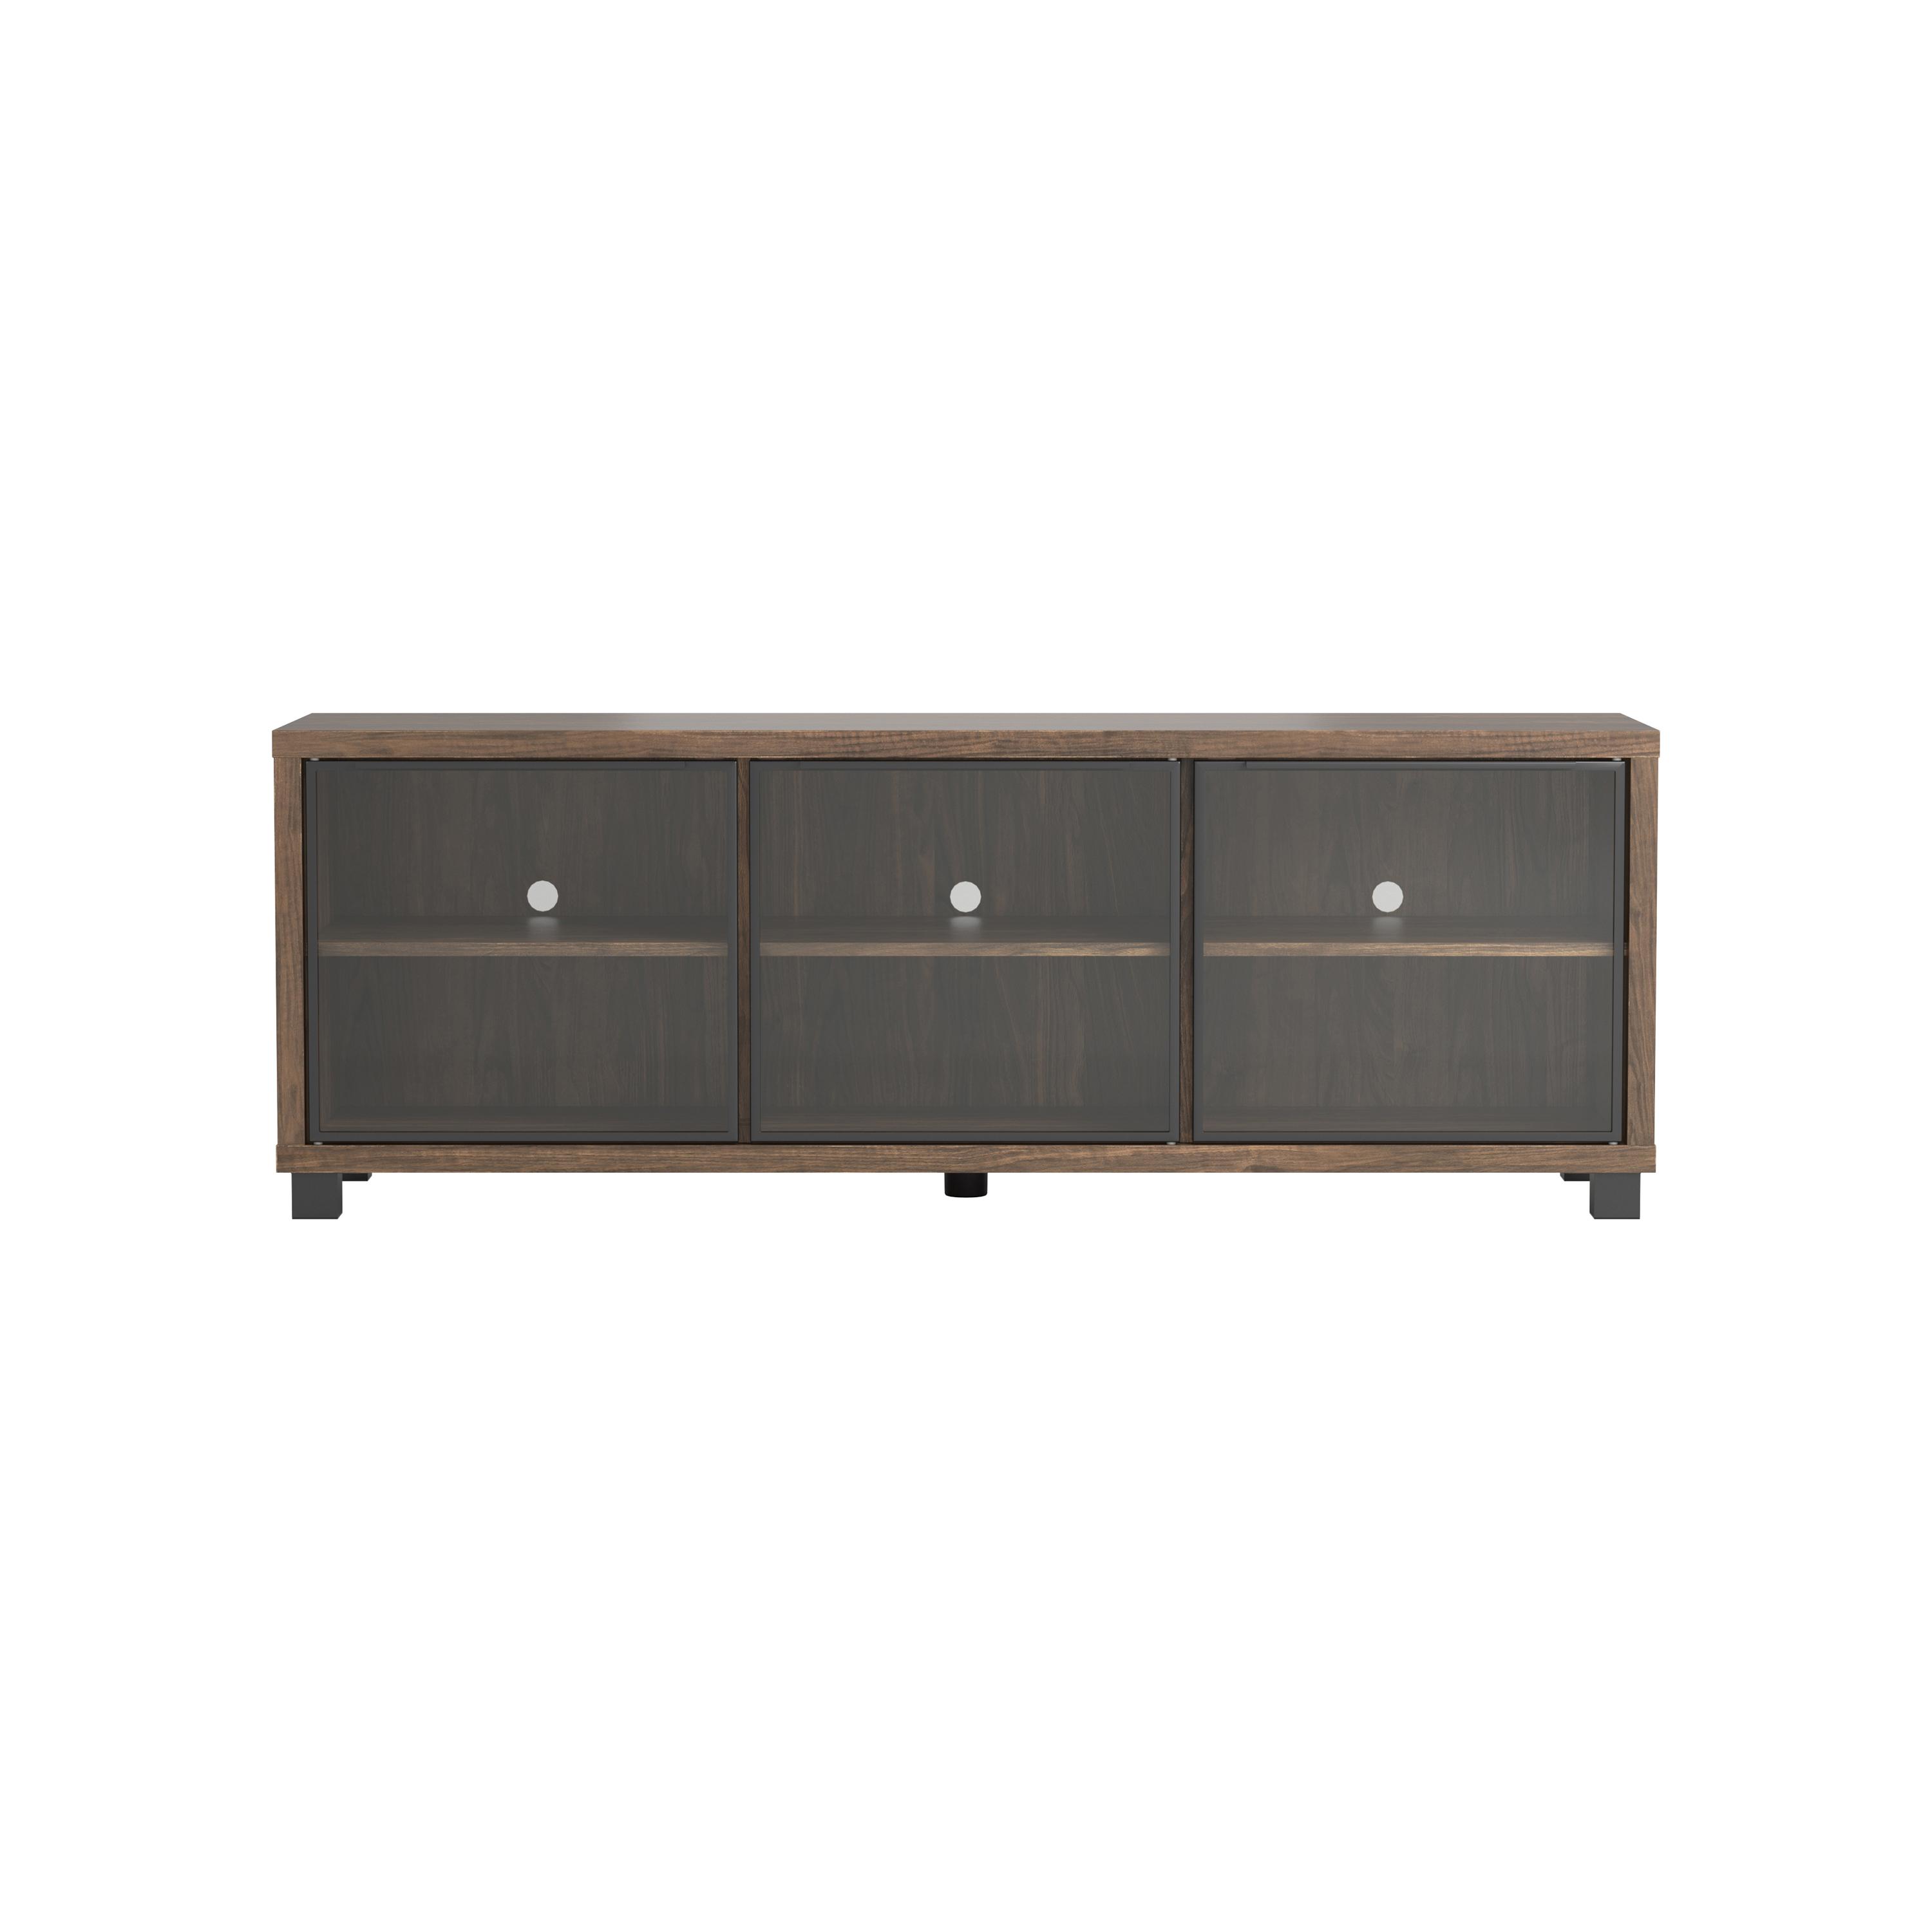 Transitional Tv Console 723662 723662 in Walnut 